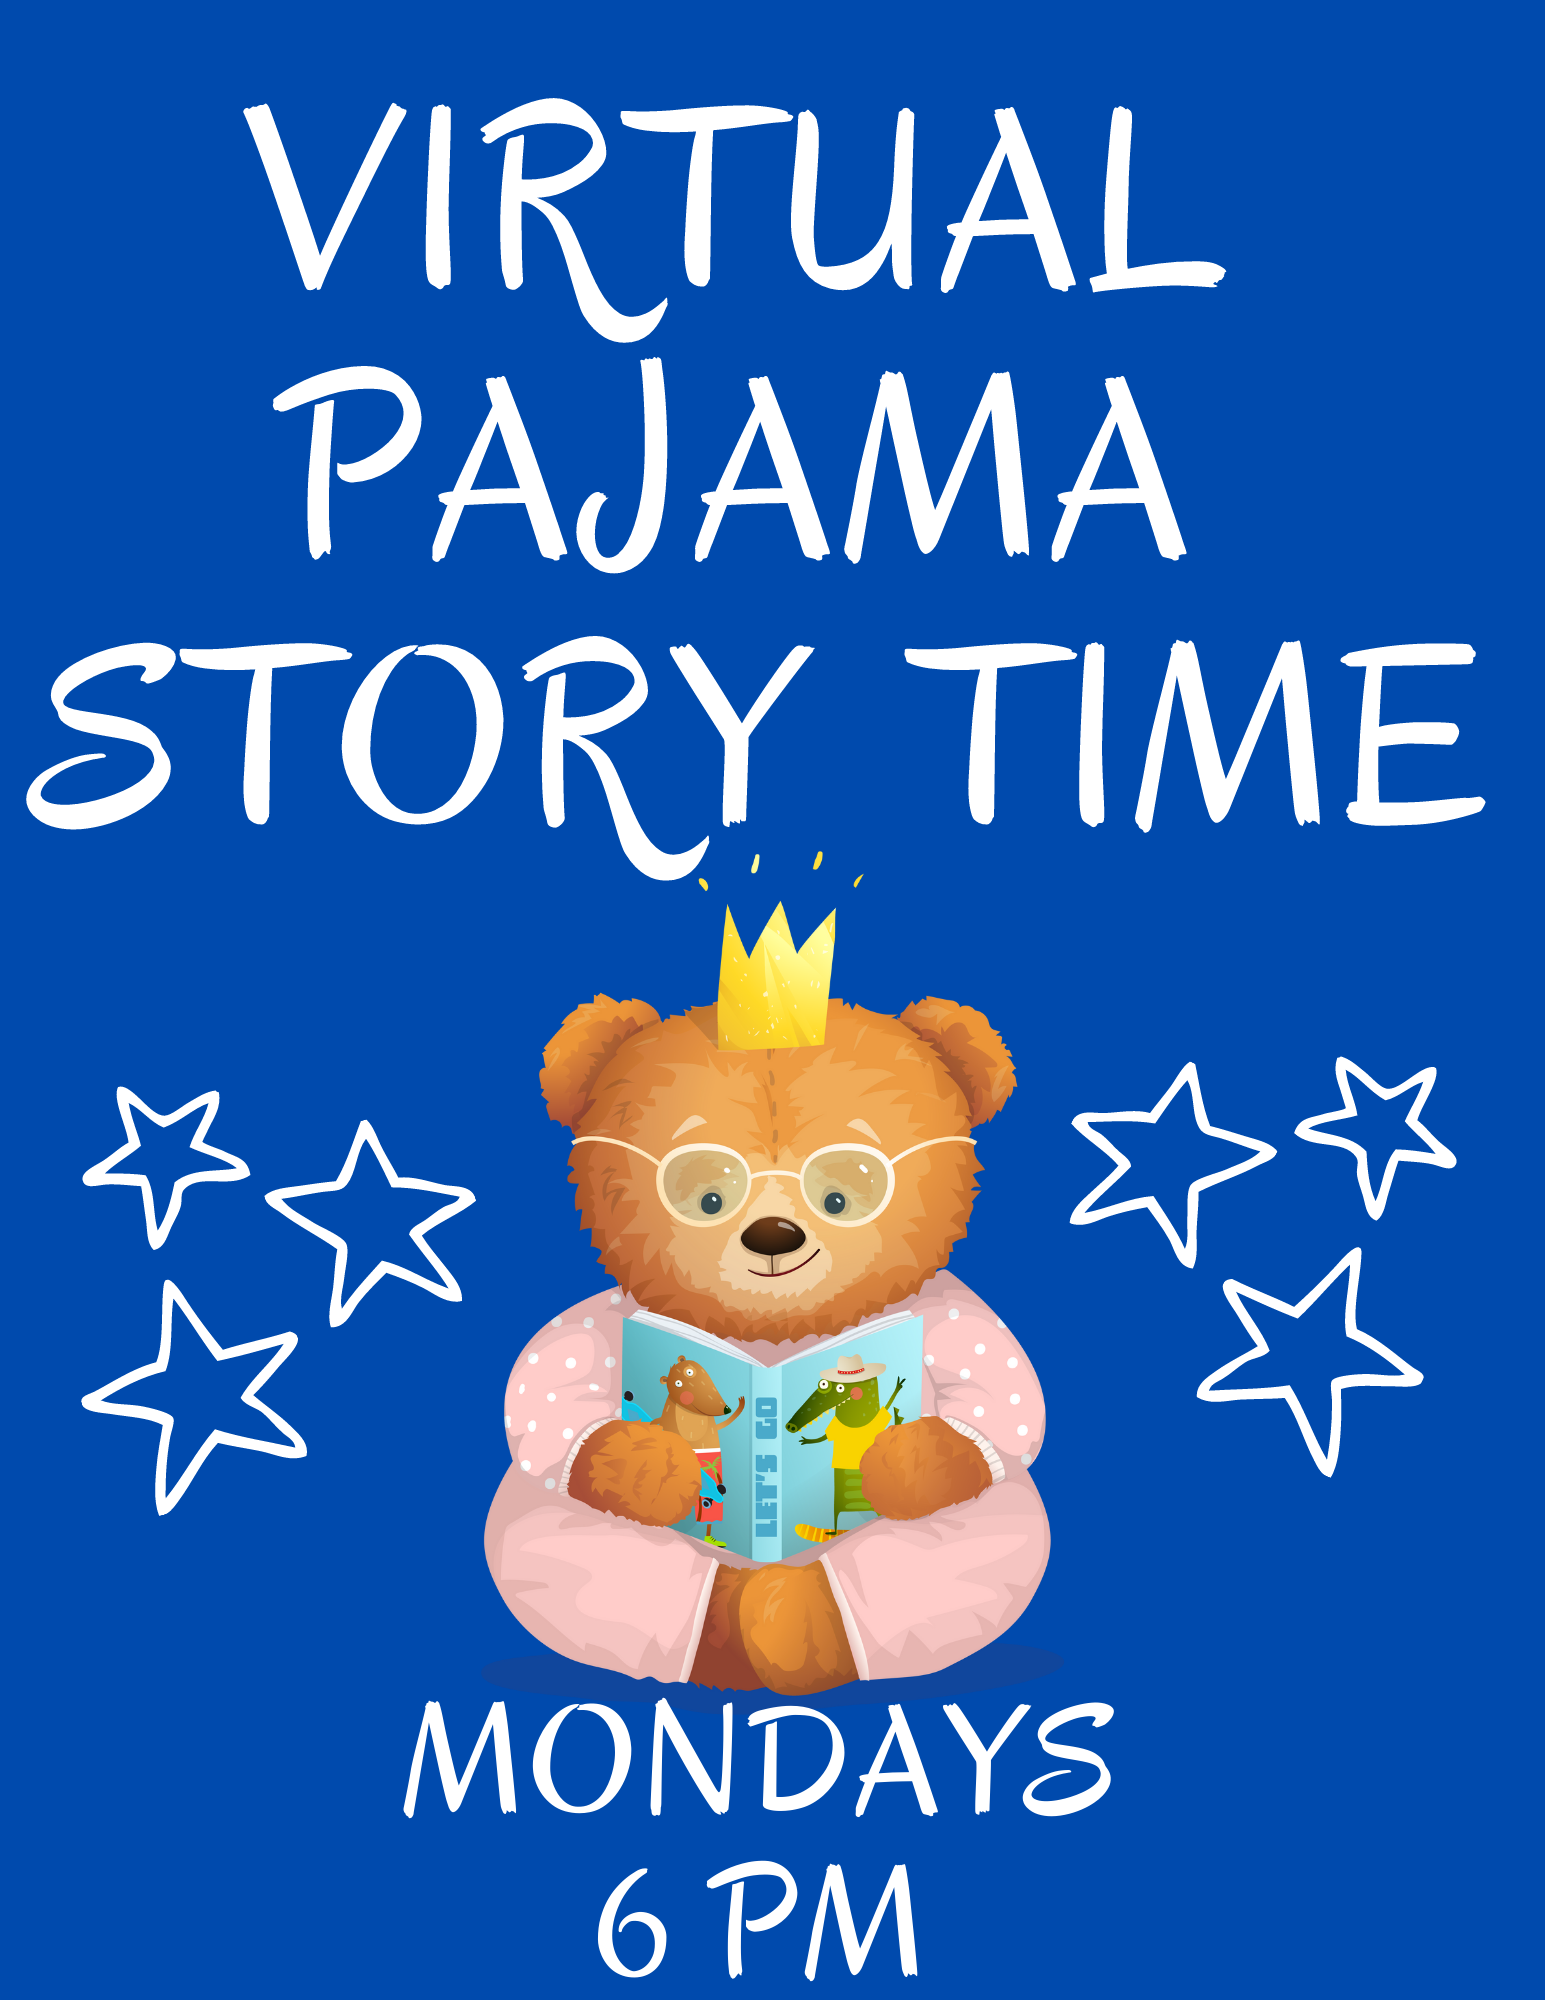 text reads virtual pajama story time Mondays 6 pm with image of bear reading a book.